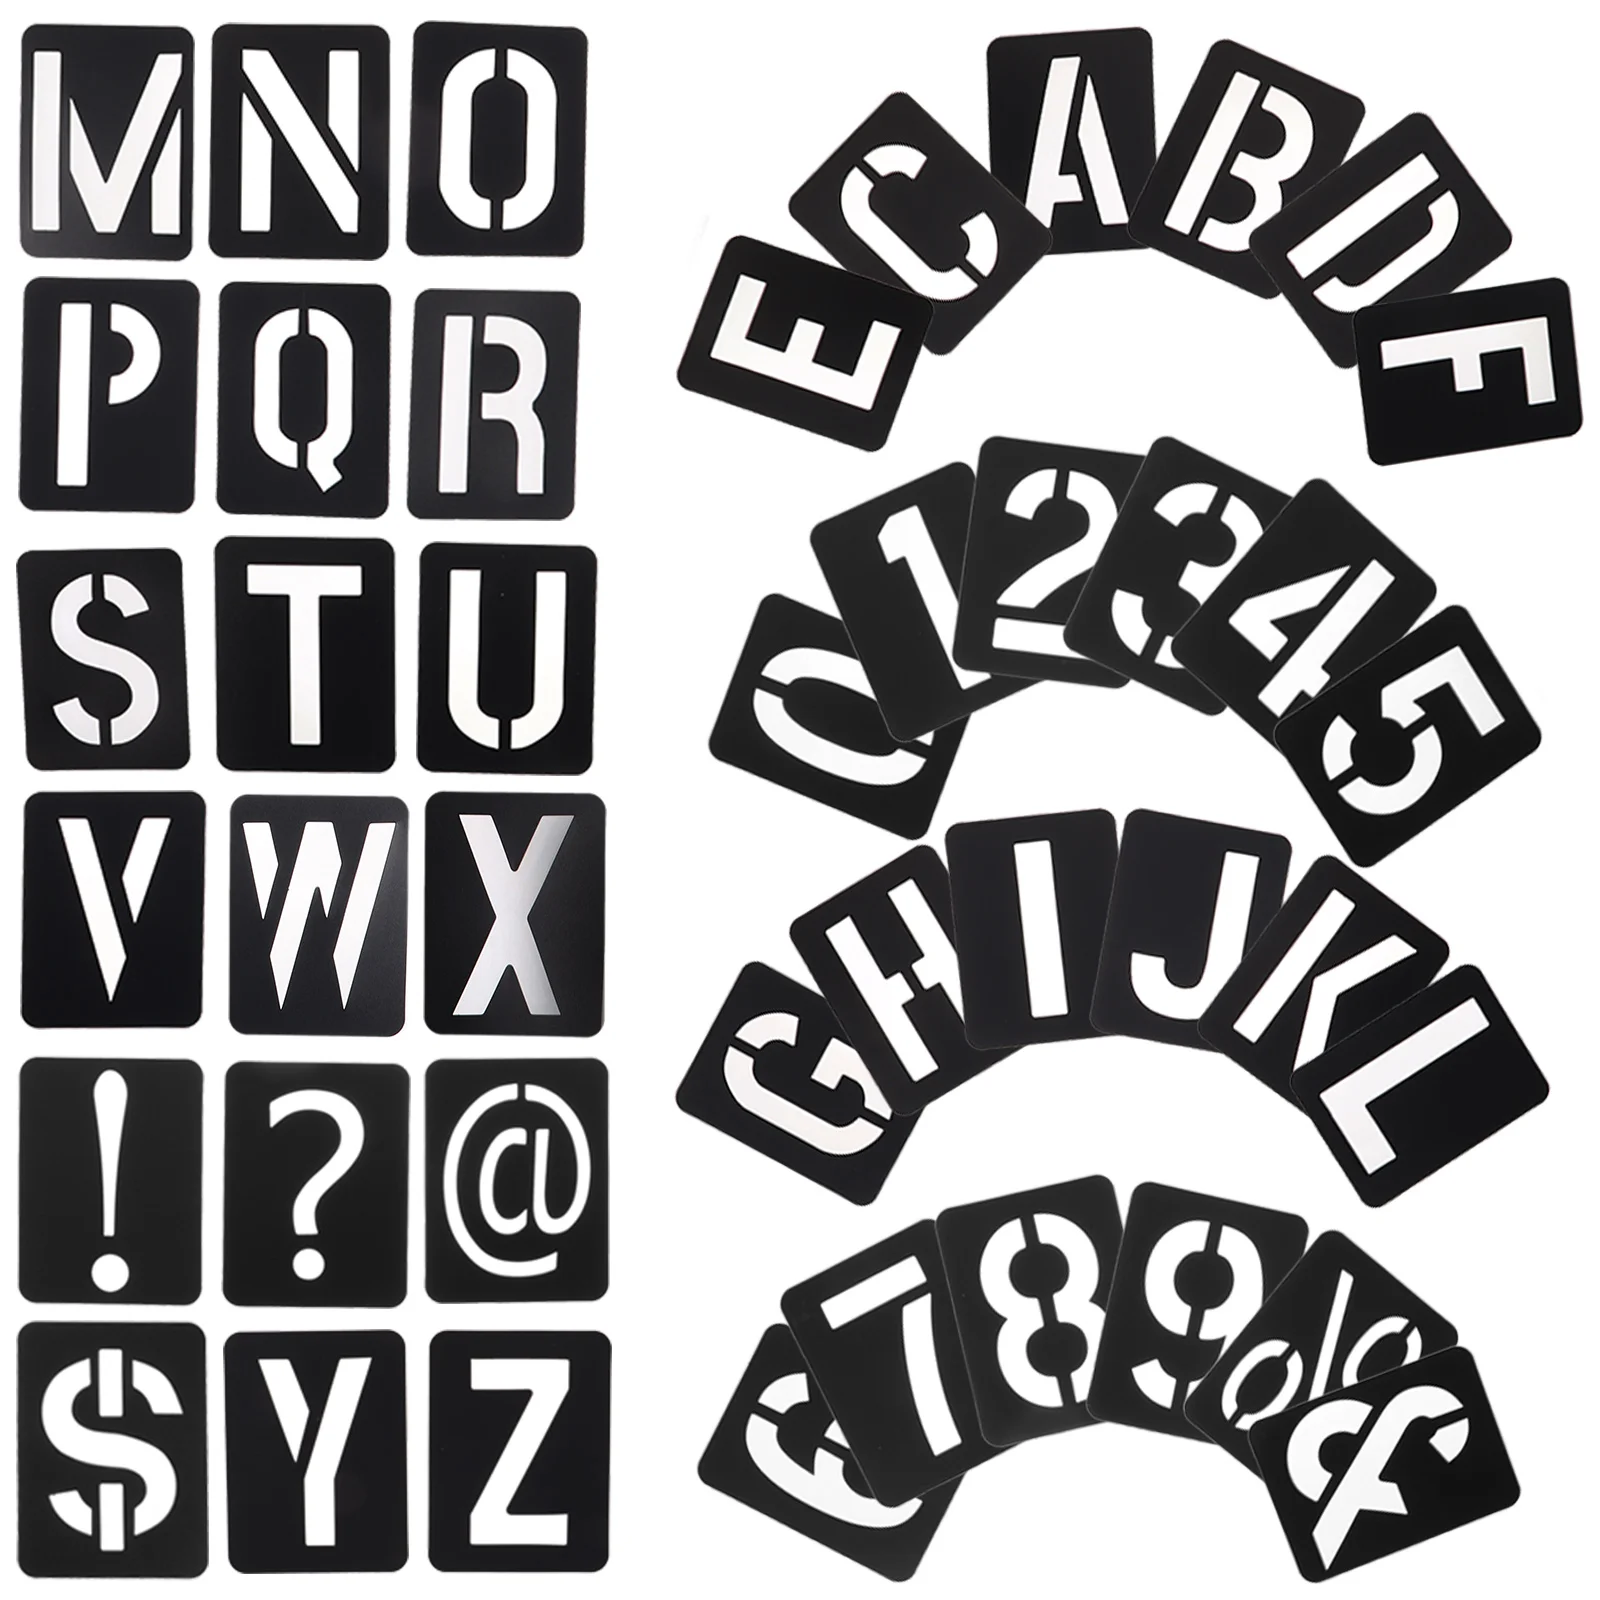 1 Set of Stencils Letter Stencils Stencils Plastic Stencil for Painting DIY Craft with Numbers and Signs bga reballing station 90mm x 90mm stencils holder template fixture jig with hand shank